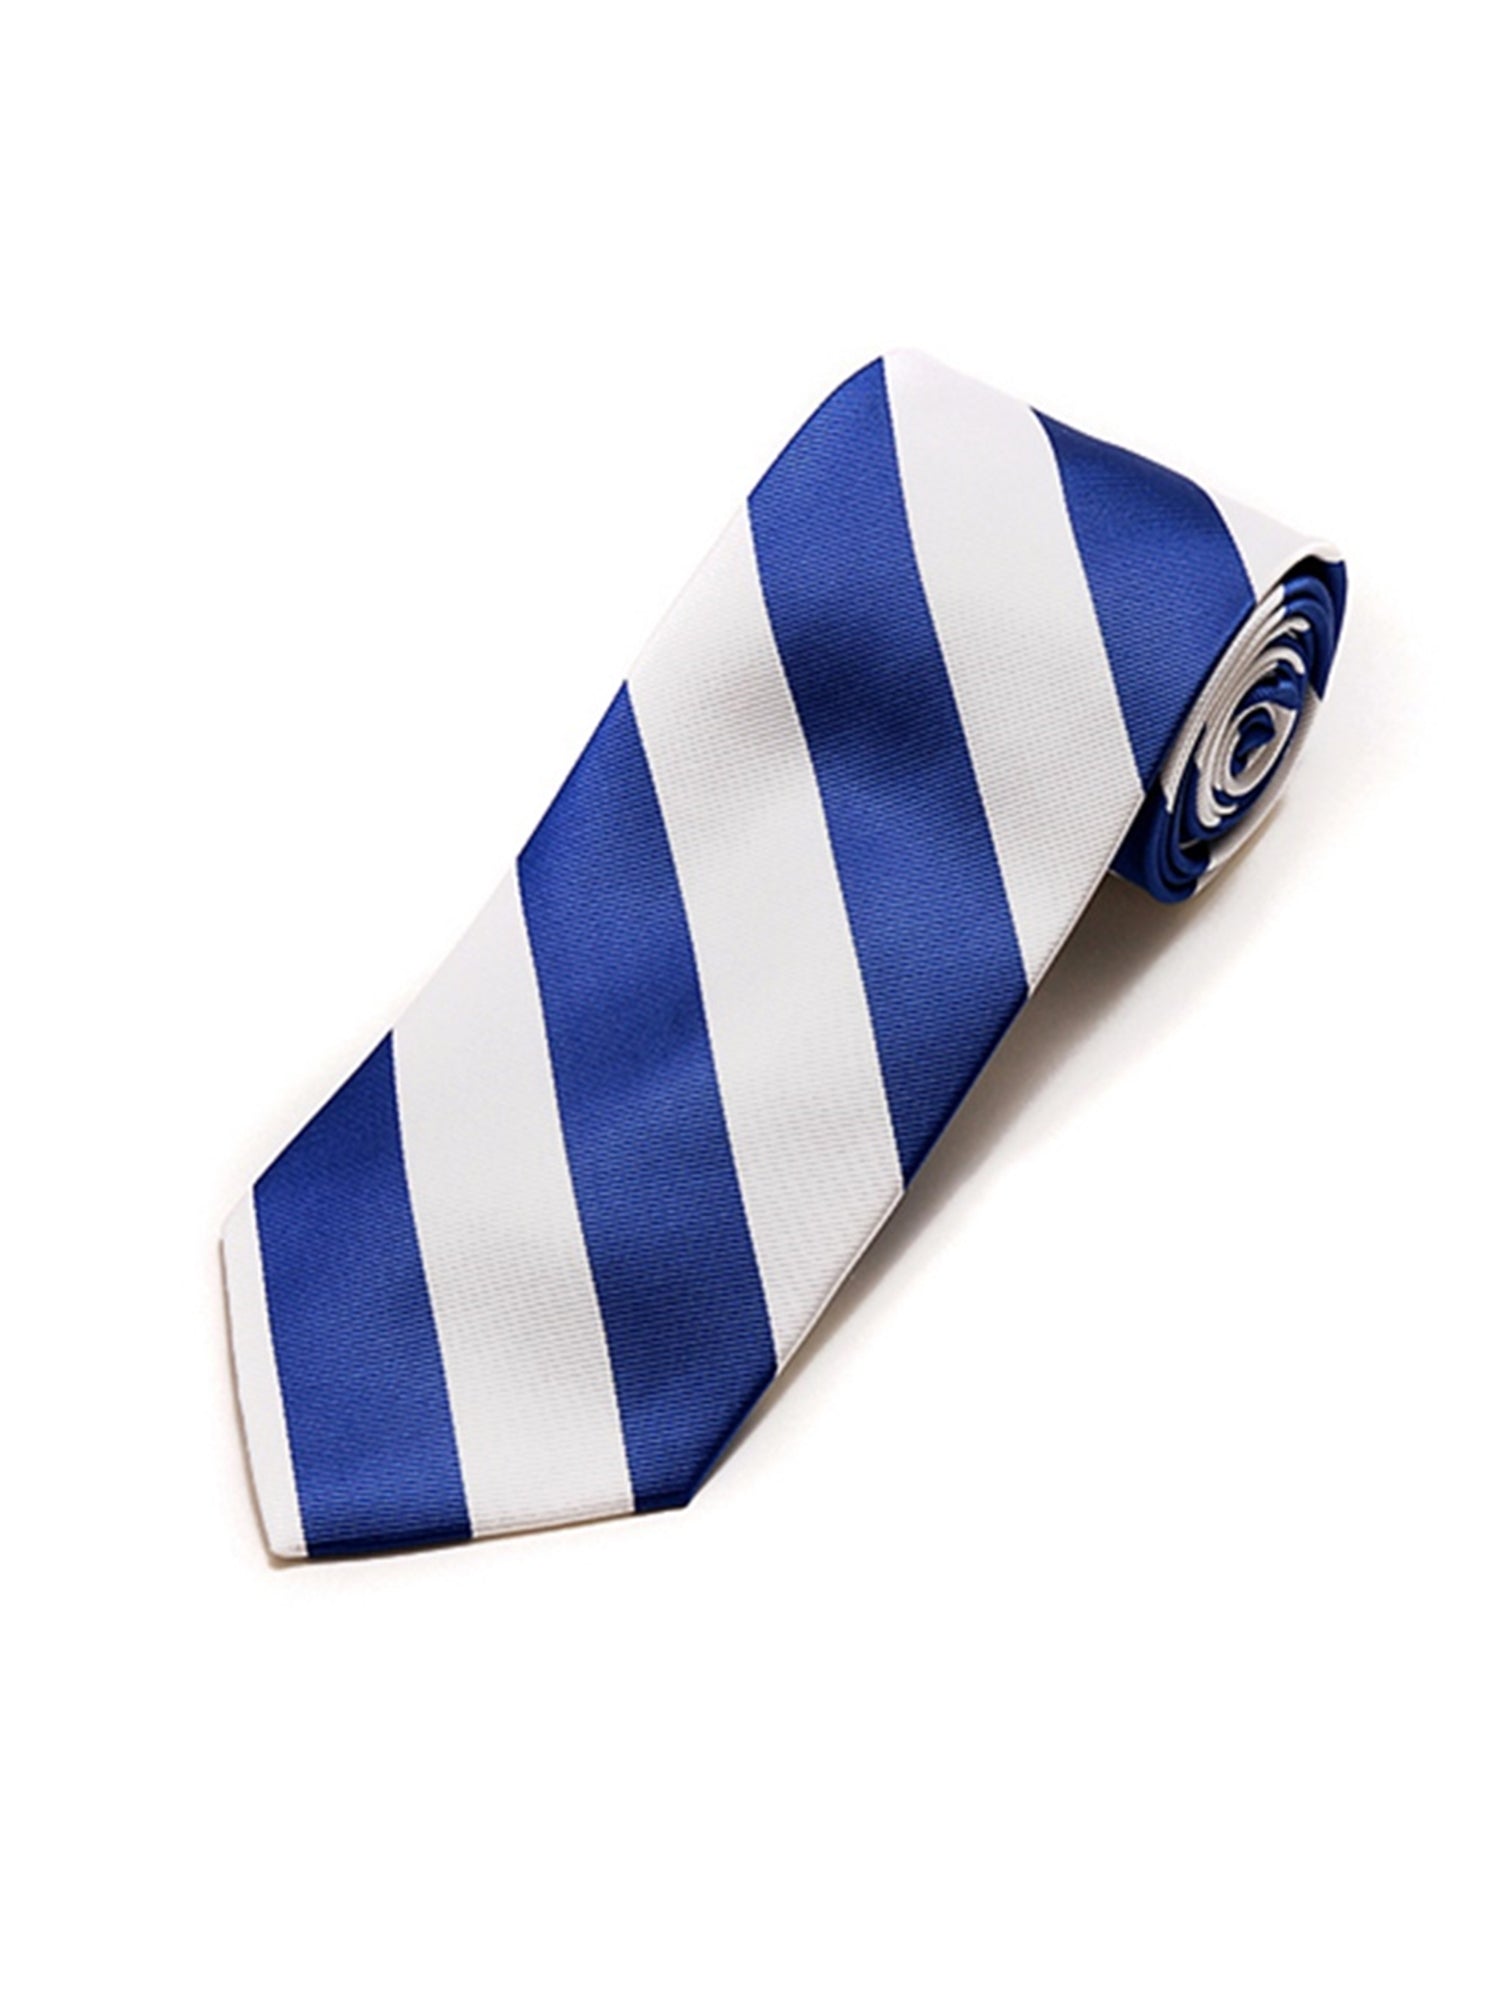 Men's College Striped Colored Silk Long Or X-Long Neck Tie Neck Tie TheDapperTie Blue & White 57" long & 3.25" wide 